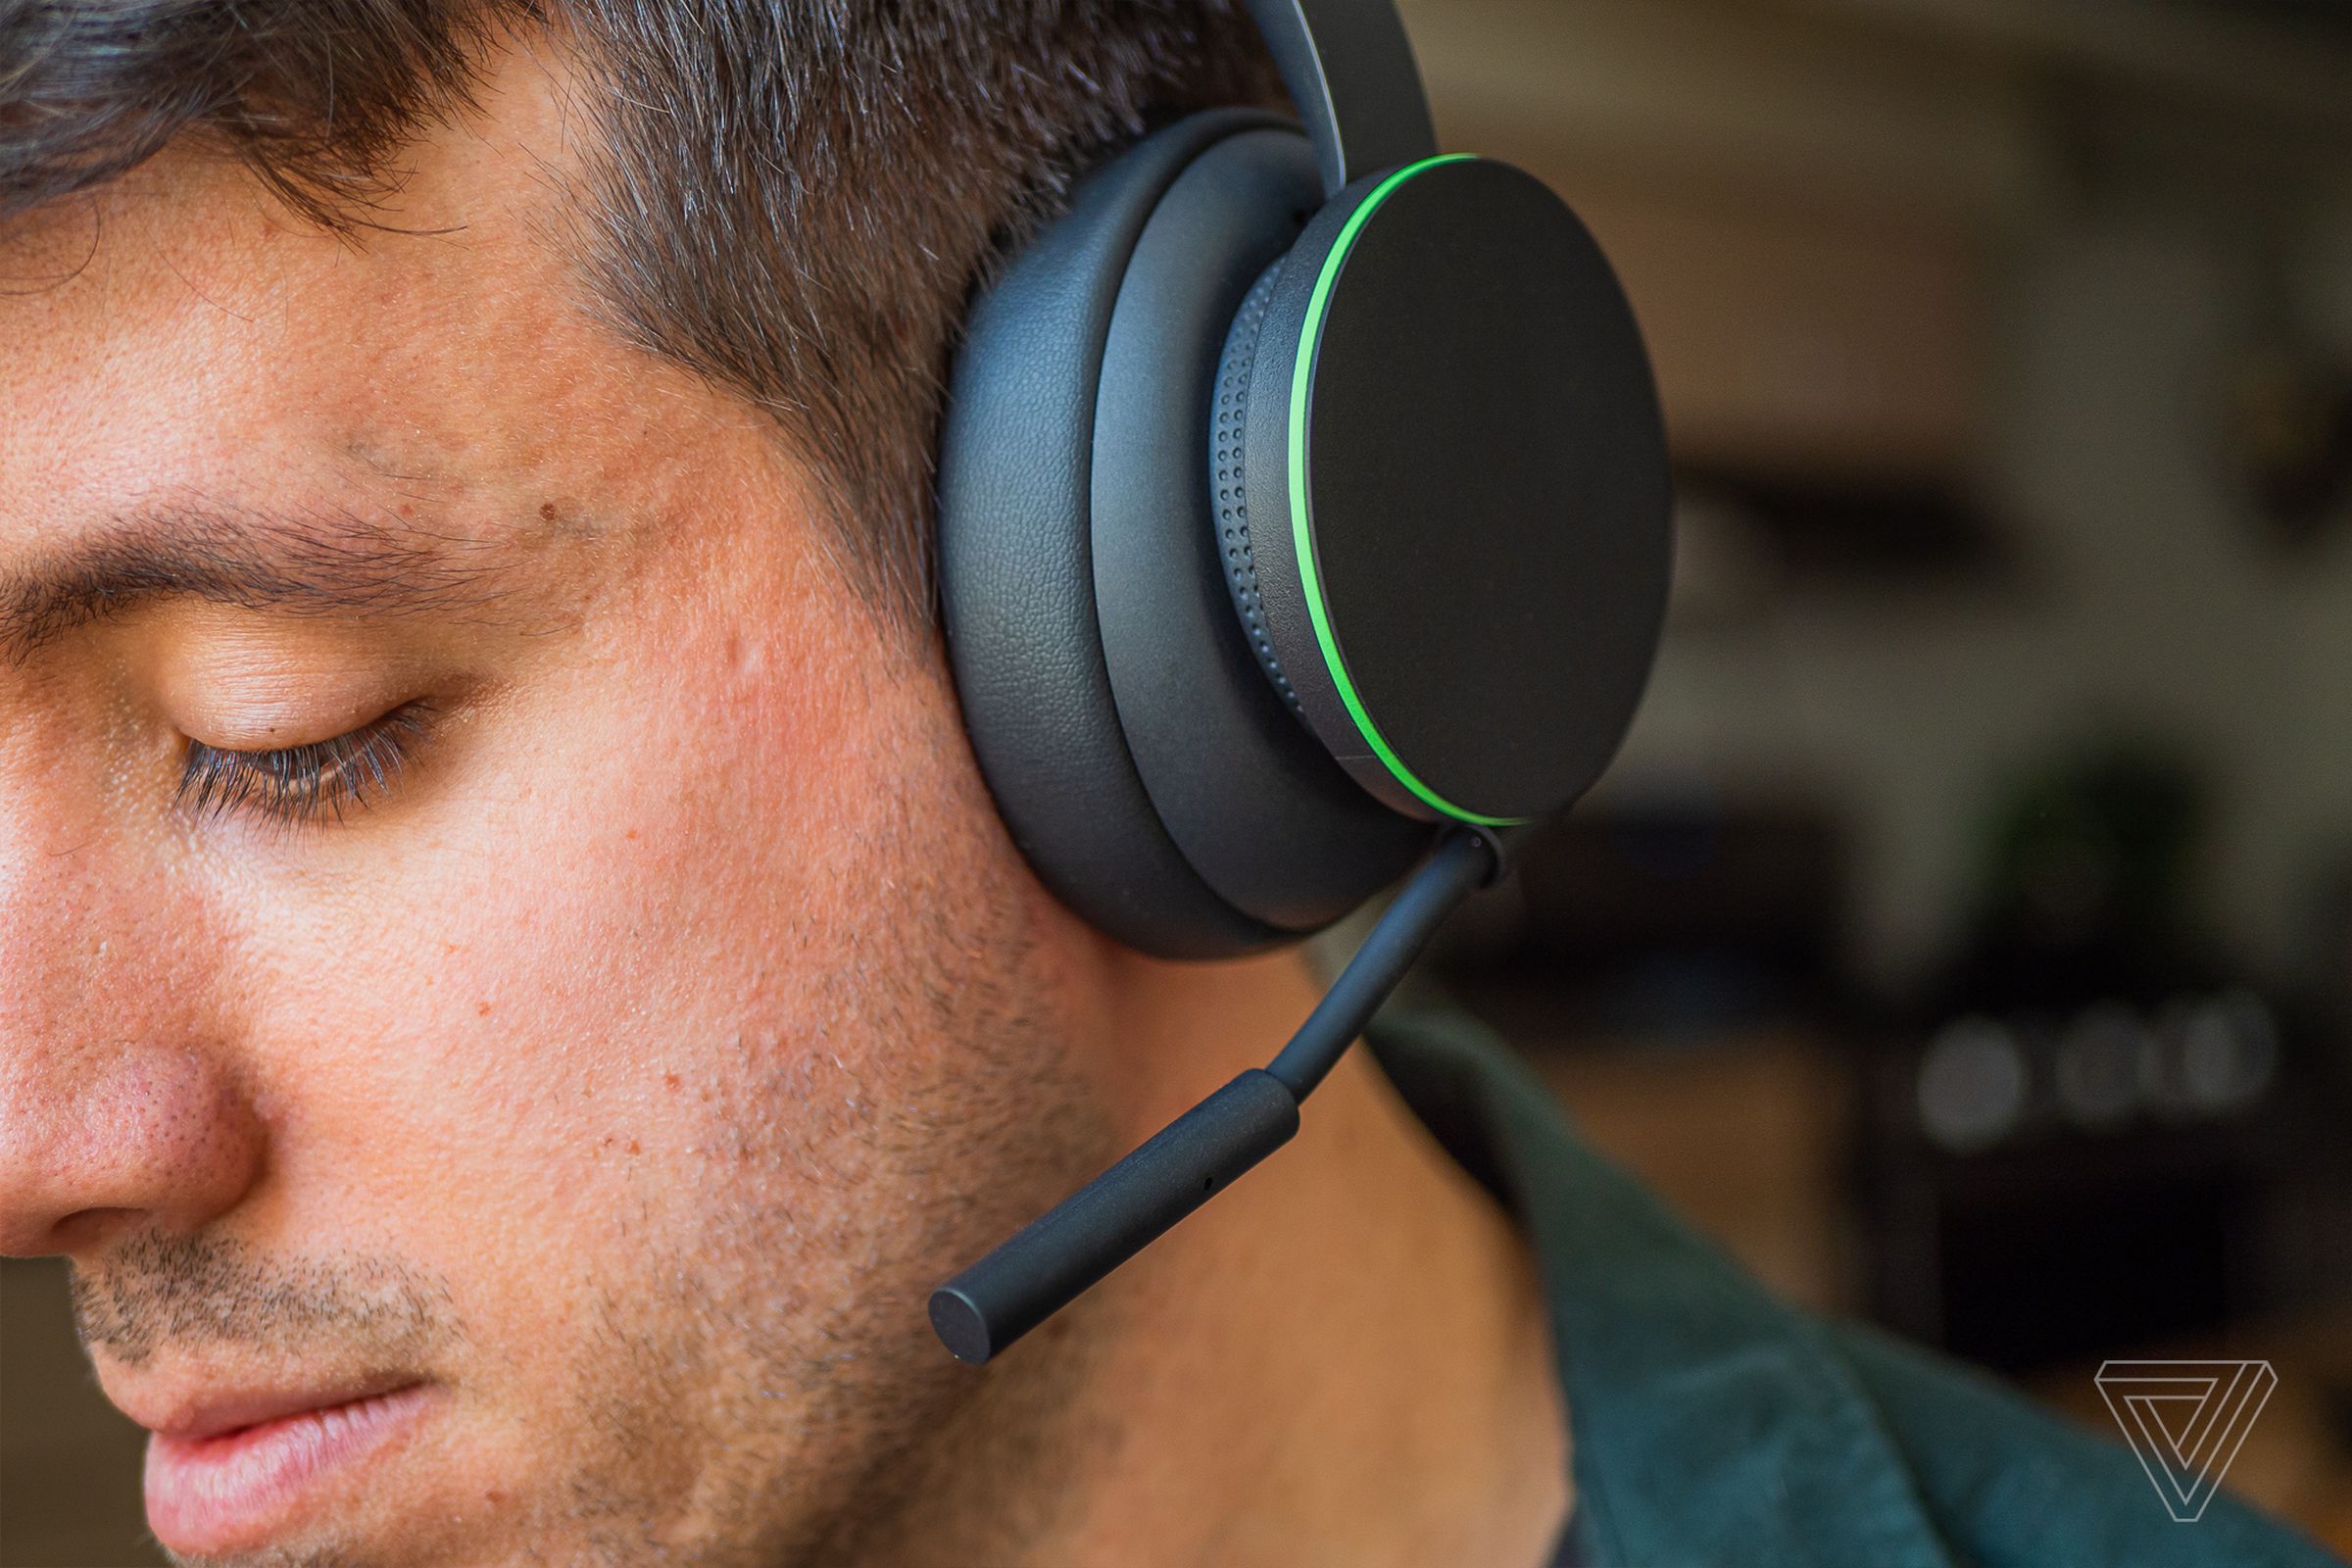 Accessories like the Xbox Wireless Headset let you make the most of Microsoft’s next-gen console.